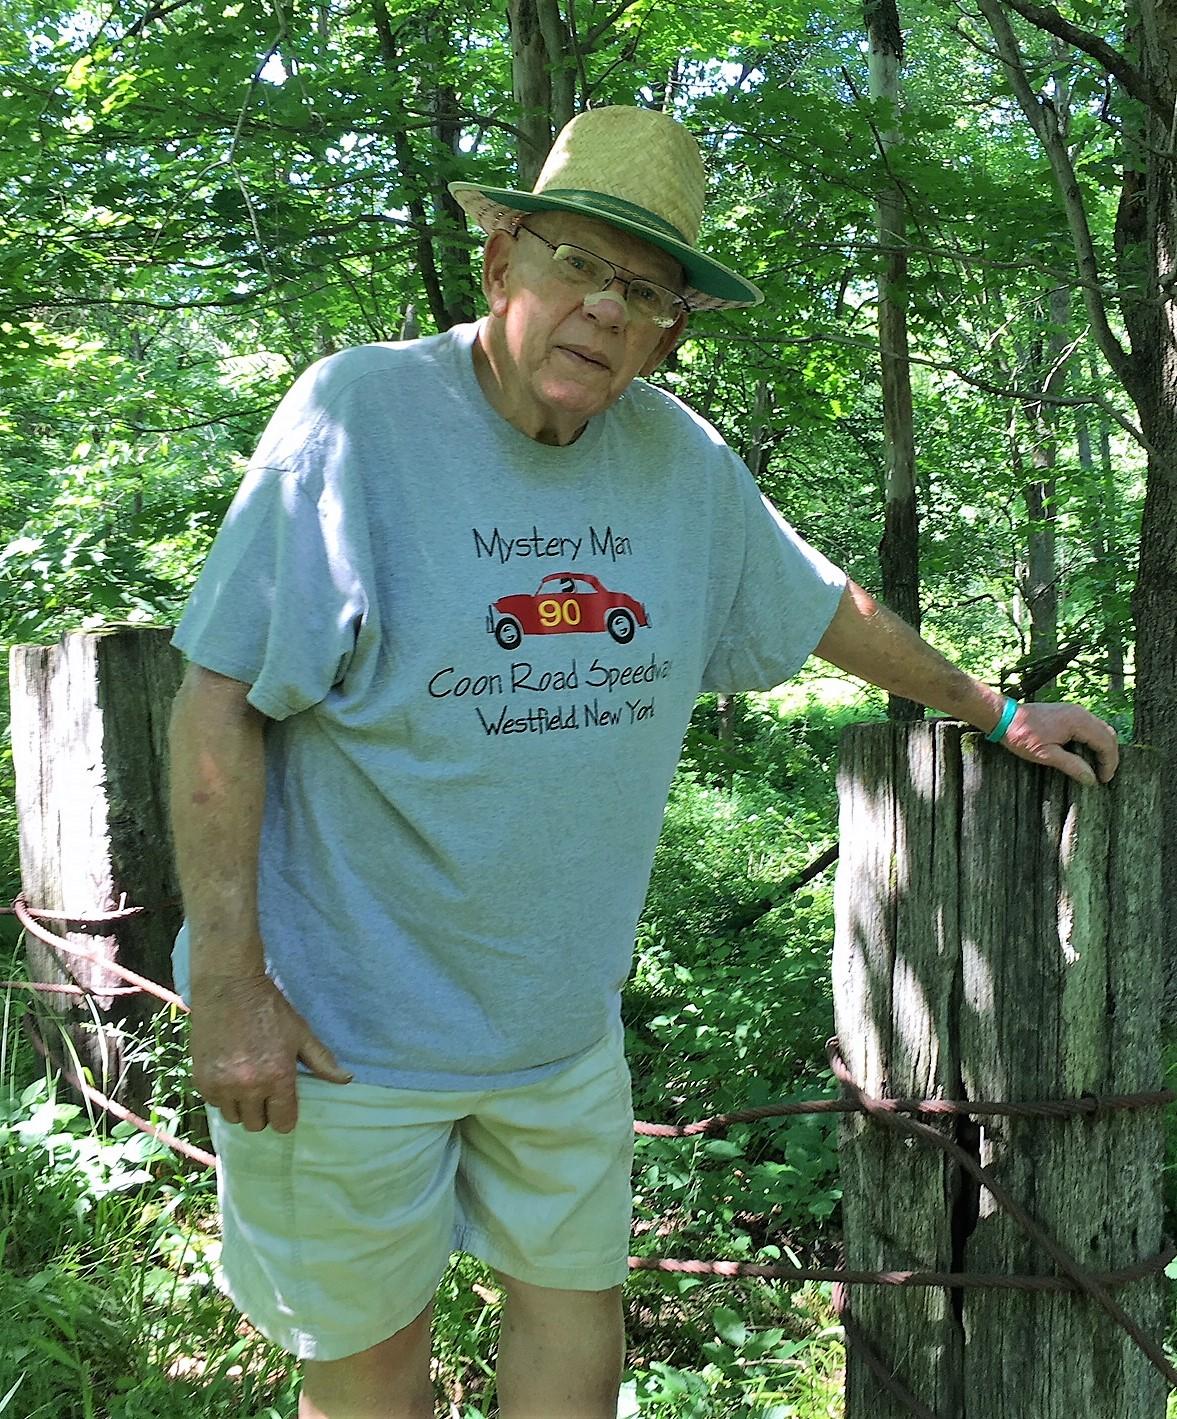 Ken See, the "Mystery Man" of Coon Road Speedway, standing next to one of the original turn three guardrails, at the site of the former race track. Photo taken 7-8-18